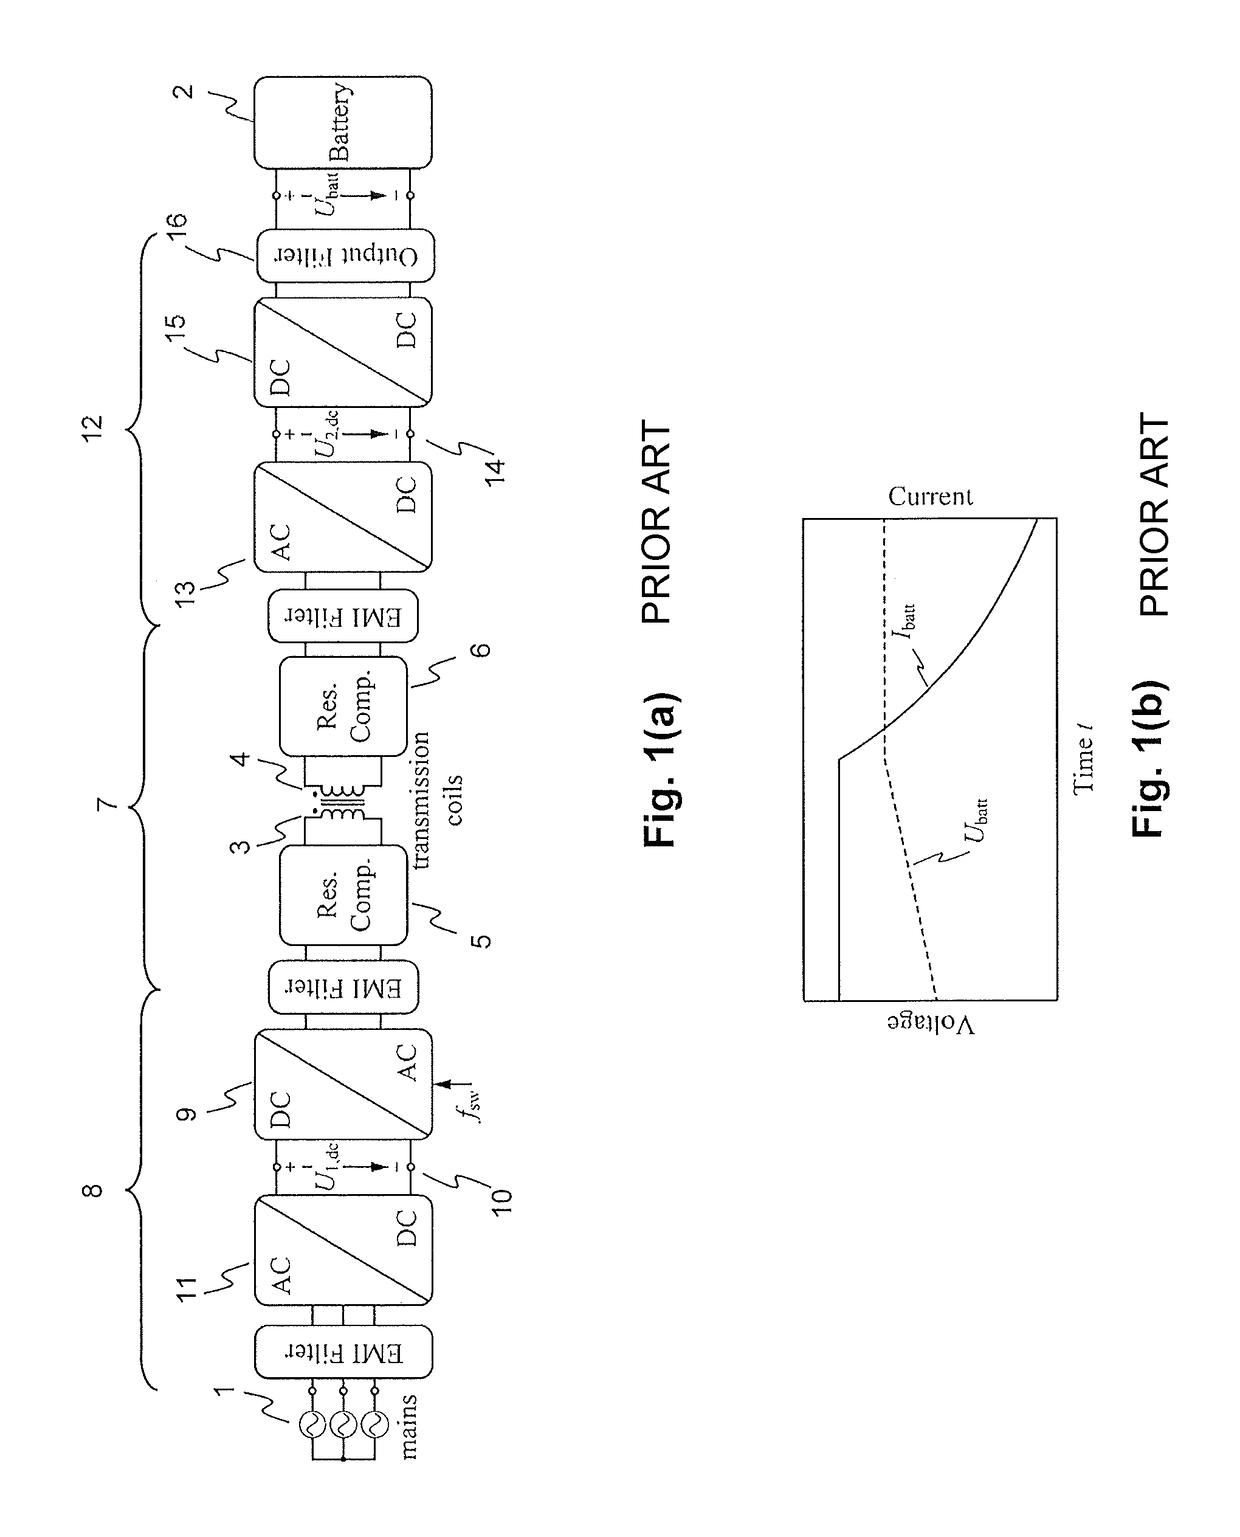 Inductive power transfer system and method for operating an inductive power transfer system